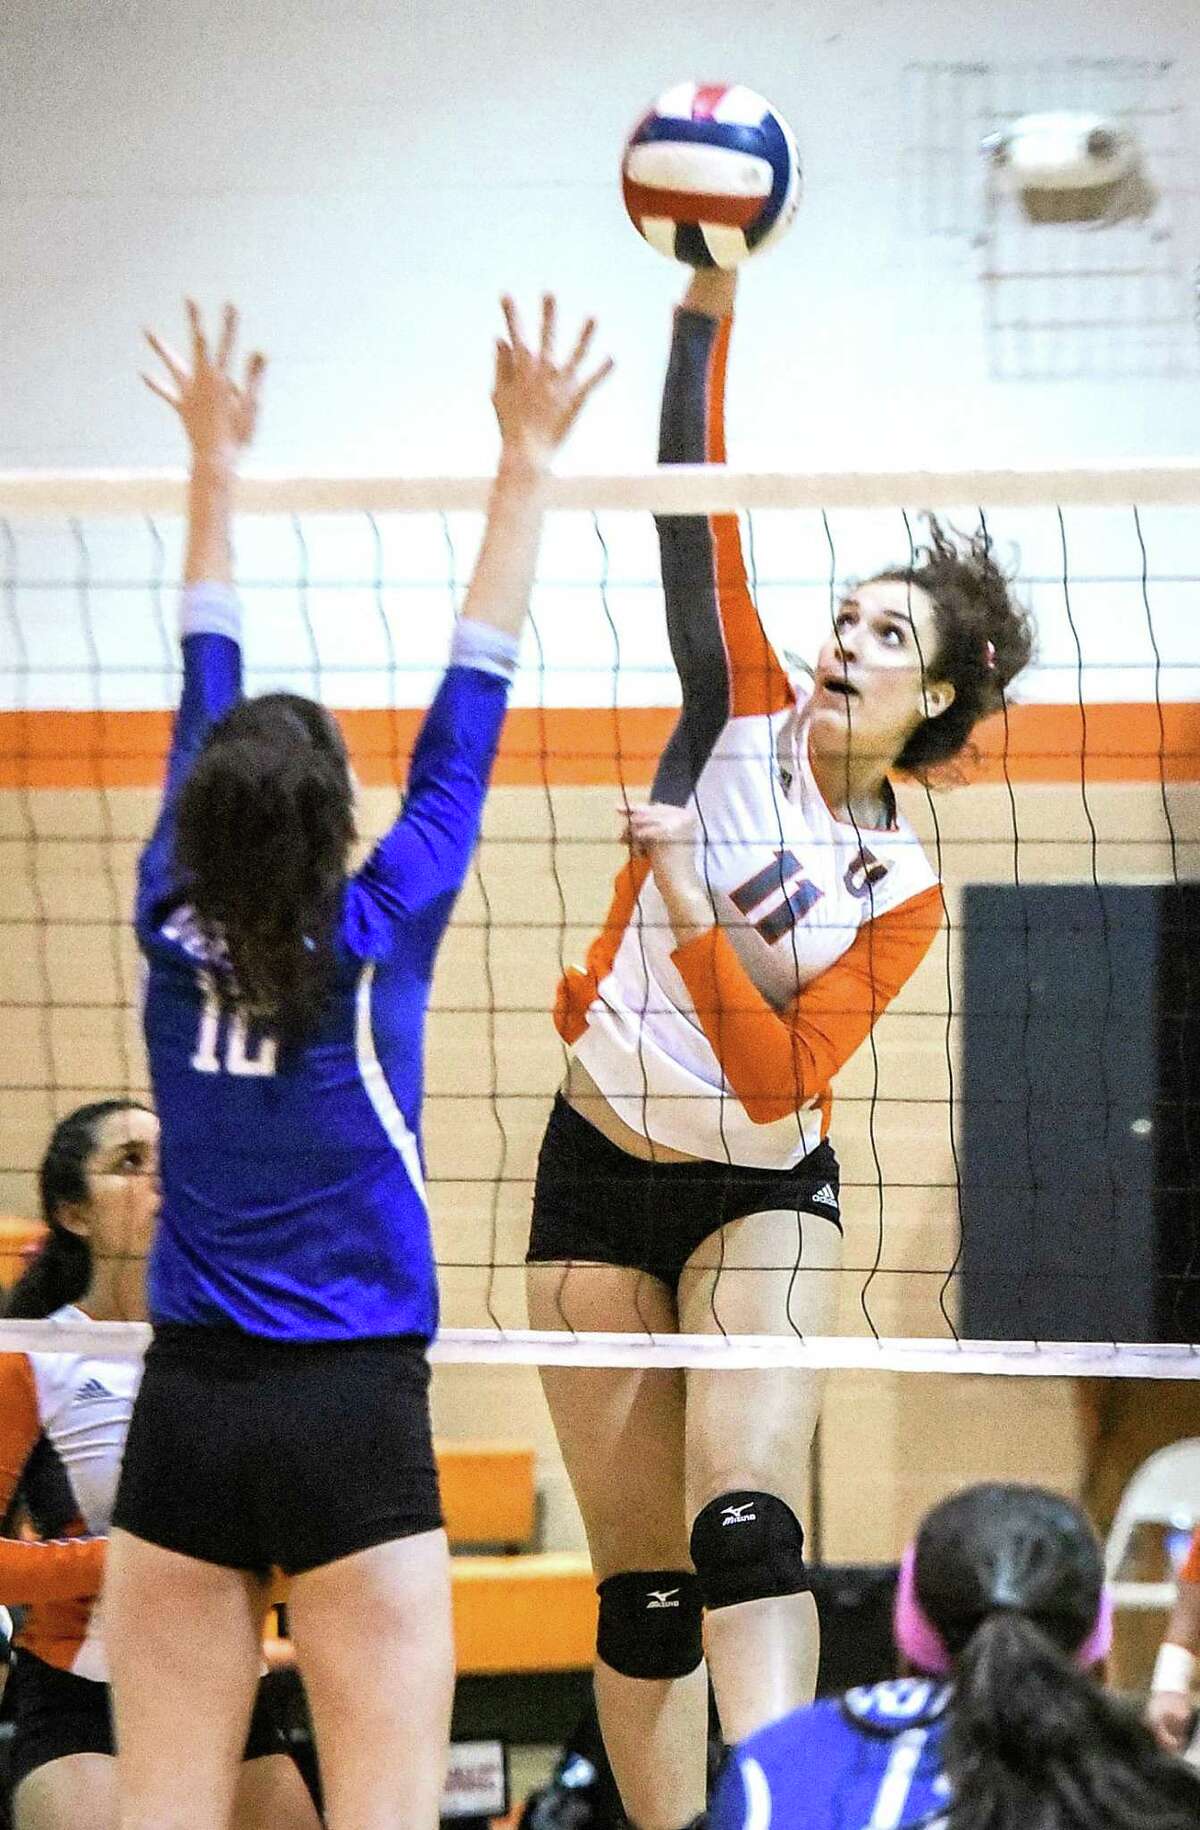 Lauren Arzuaga and United won a pair of games Friday but saw their 10-game win streak end in their third and final game of Day 1 at the NEISD Tournament.